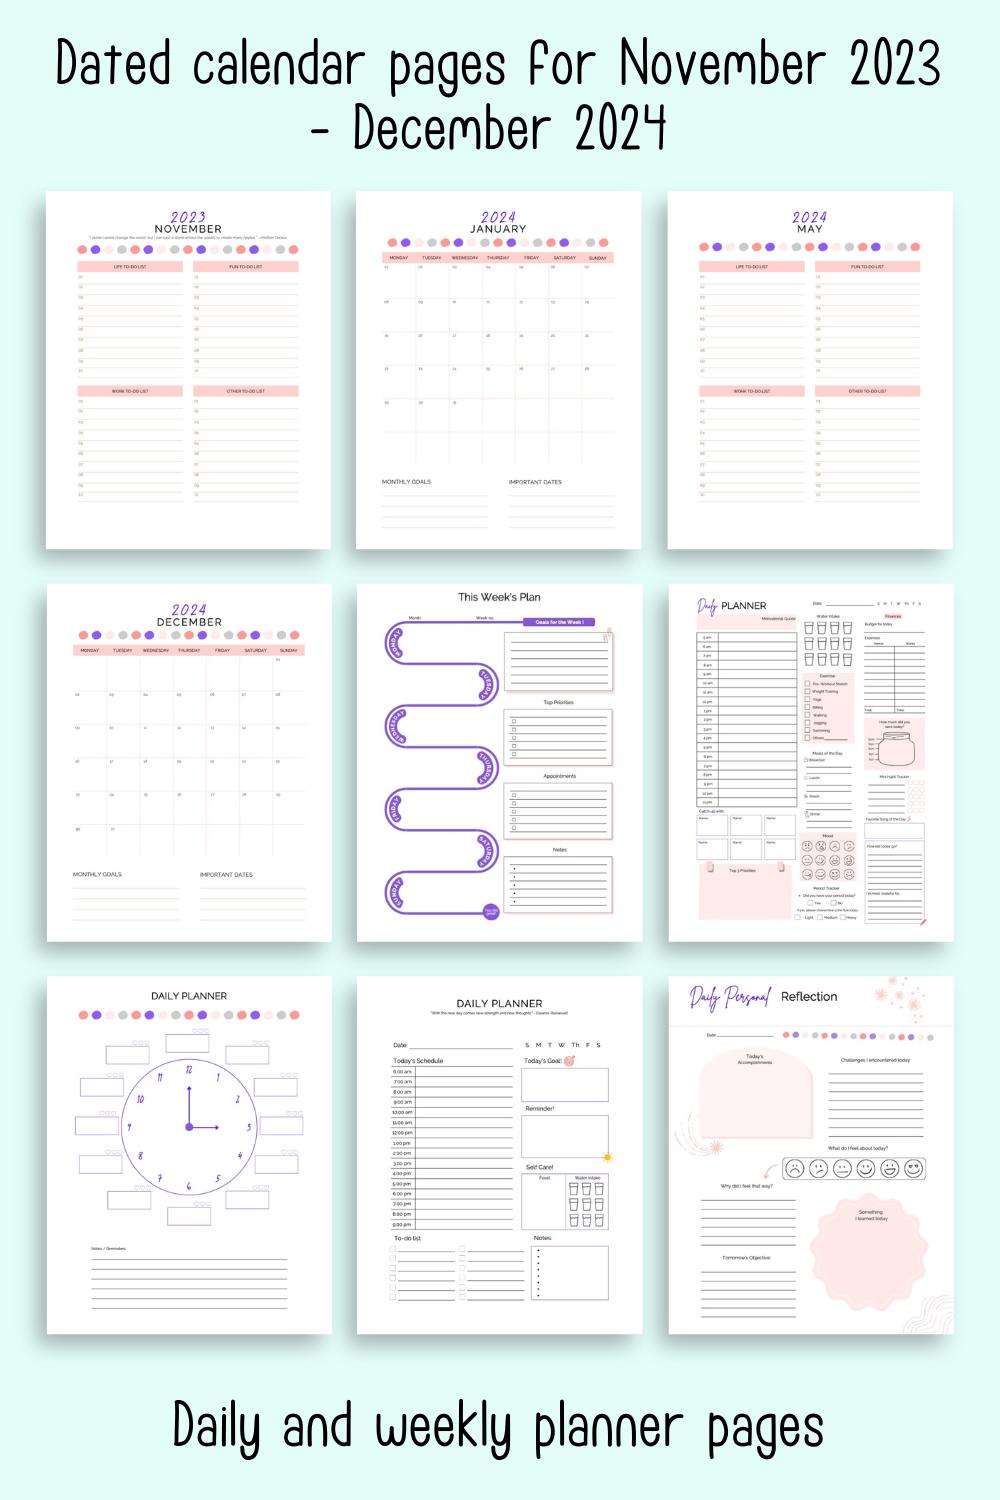 Monthly Planner Pages - FREE 2024 Planner Pages